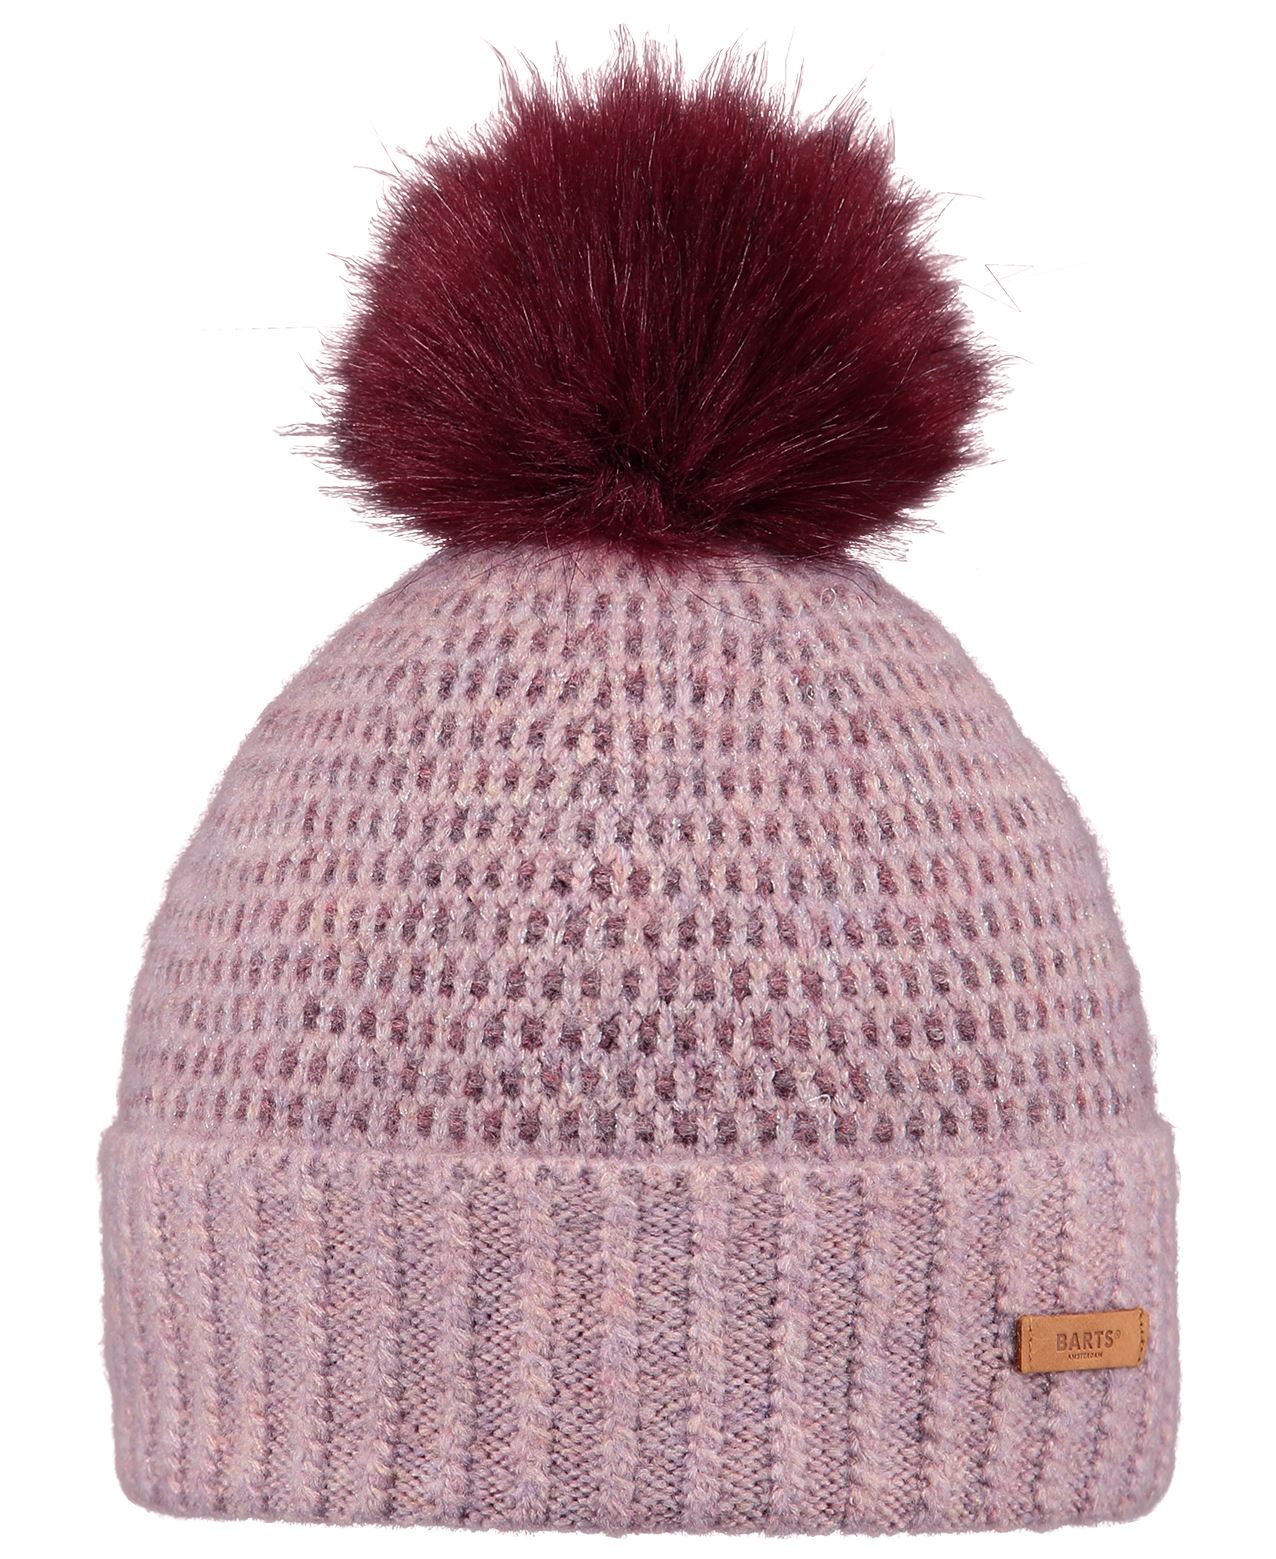 Kamrin Orchid Beanie Barts